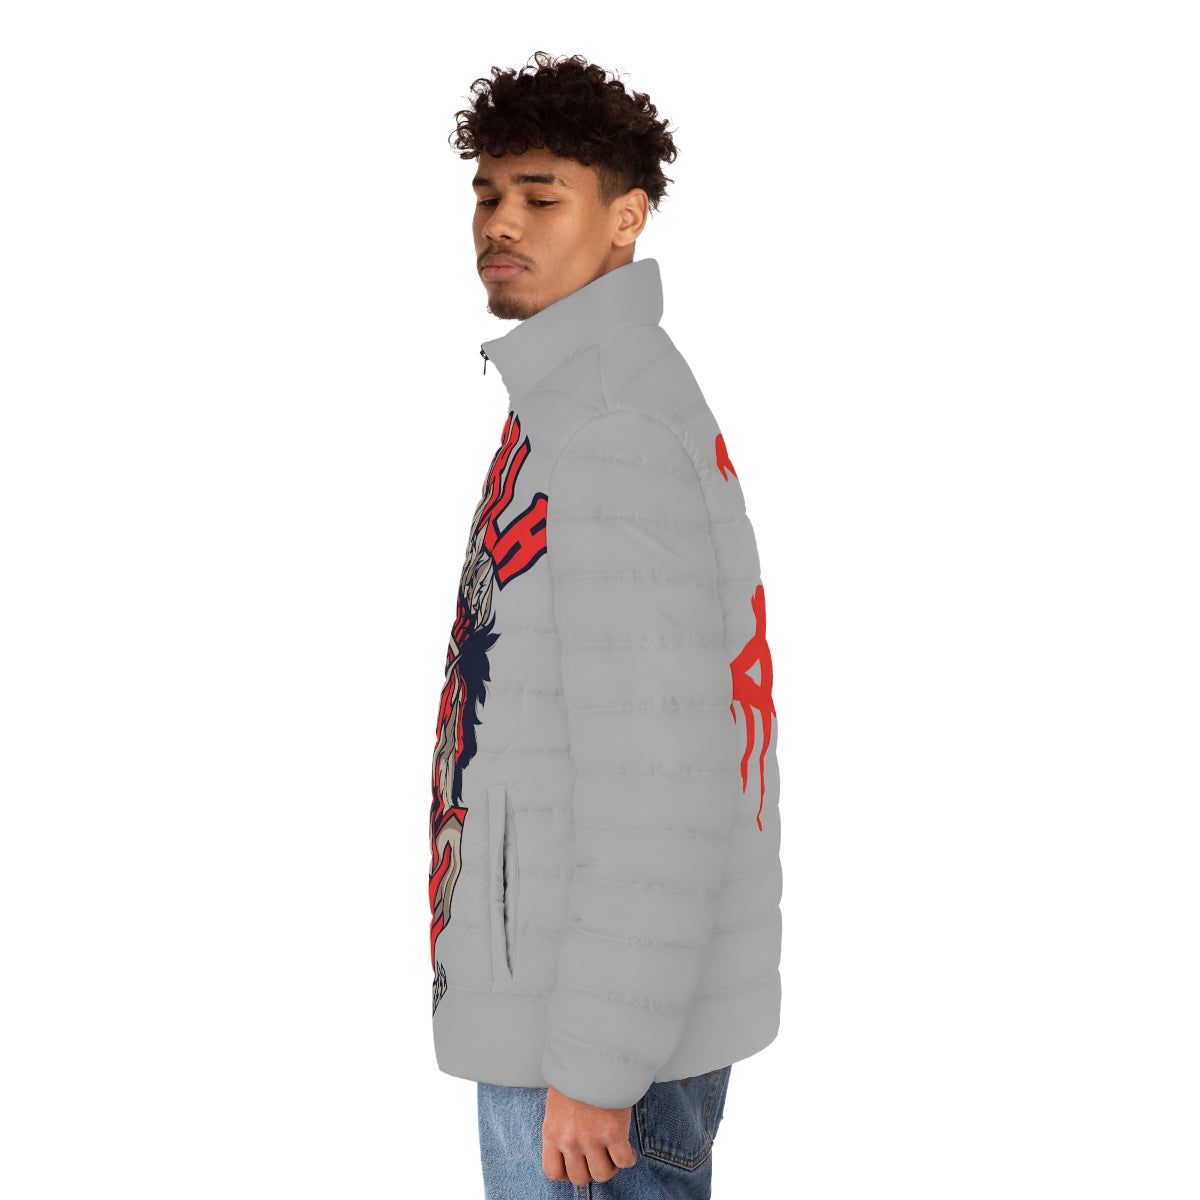 GAD WILL RISE PUFFER JACKET